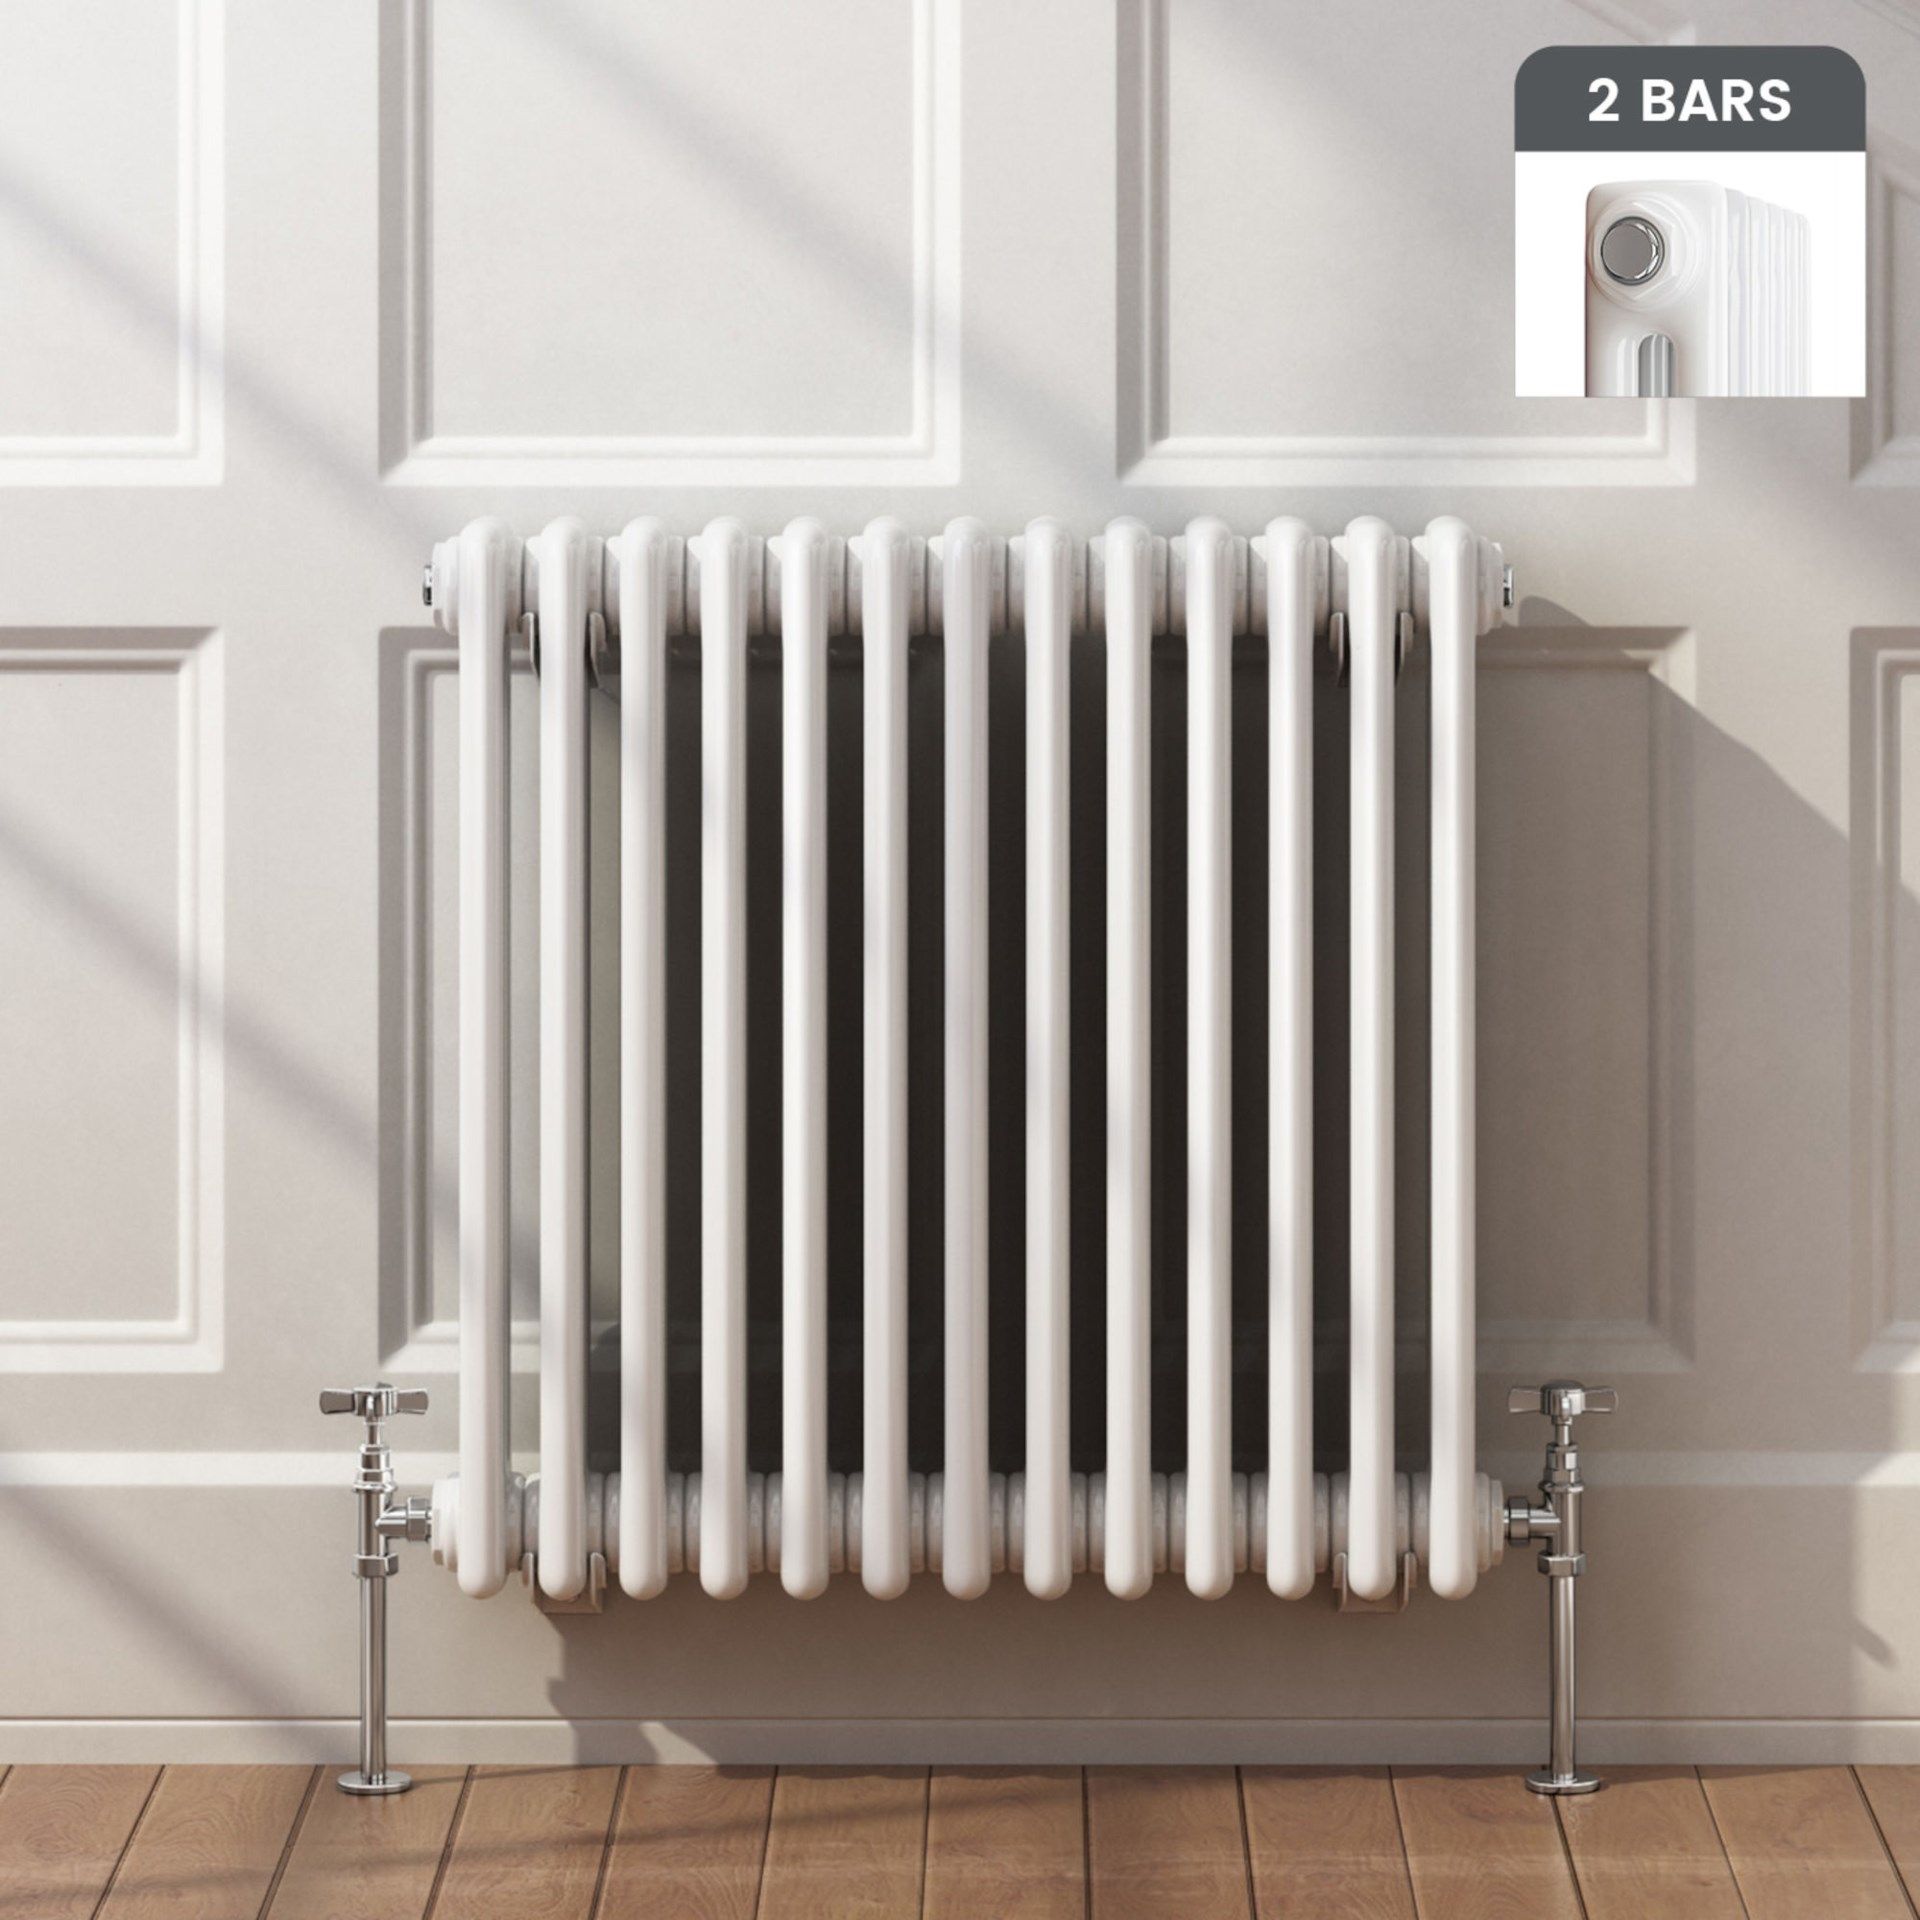 (PC89) 600x628mm White Double Panel Horizontal Colosseum Traditional Radiator. RRP £395.99.F...(